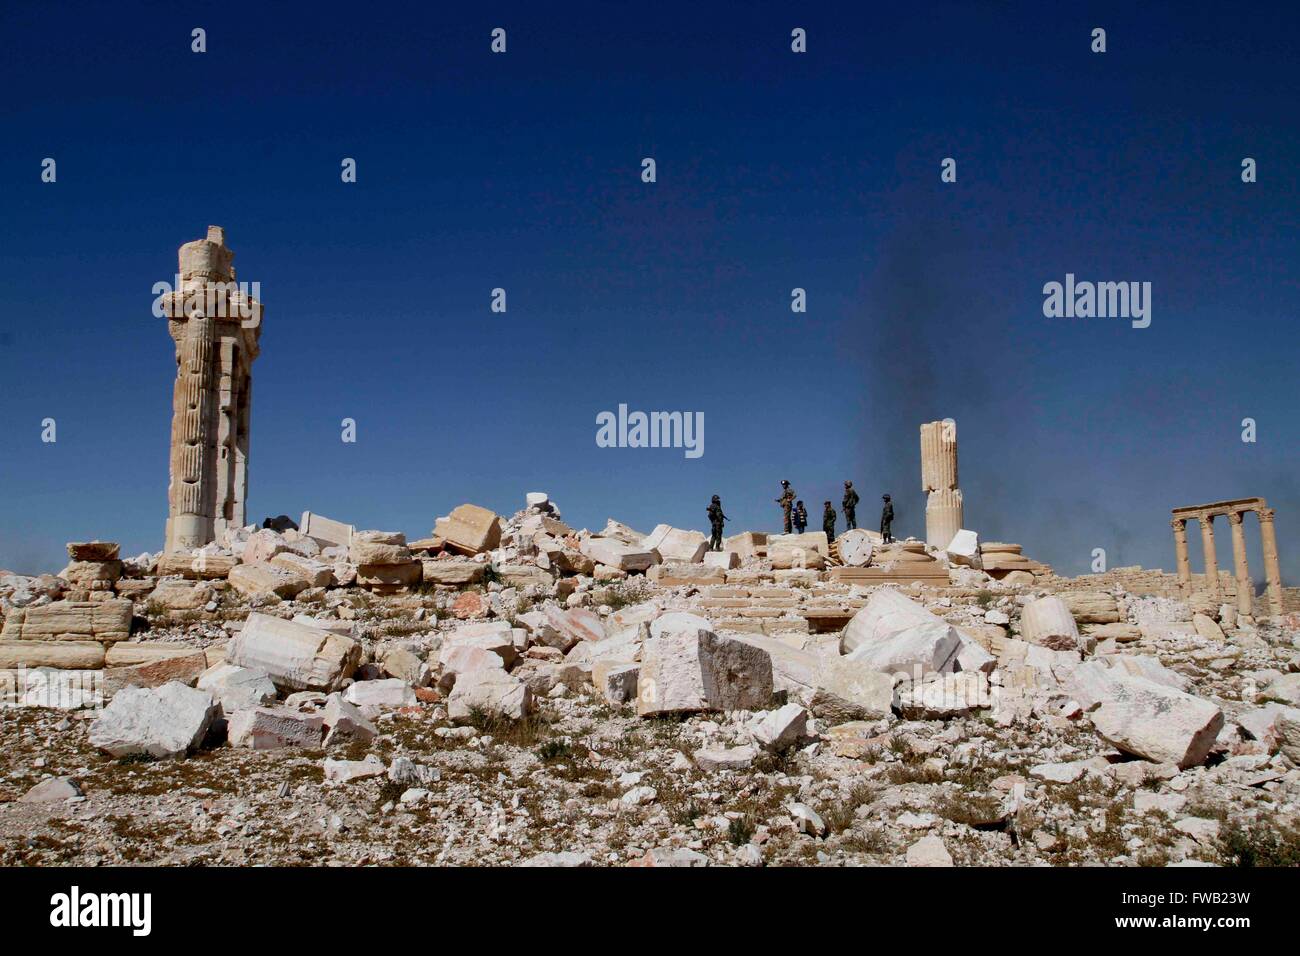 Beijing, China. 1st Apr, 2016. Several Syrian soldiers are seen on a damaged ancient temple in Palmyra of central Syria, on April 1, 2016. Syria's ancient city of Palmyra has been retaken by Syrian government forces from the Islamic State fighters. However, the city full of antiquities and ancient architectures has suffered destruction during the IS control. © Yang Zhen/Xinhua/Alamy Live News Stock Photo